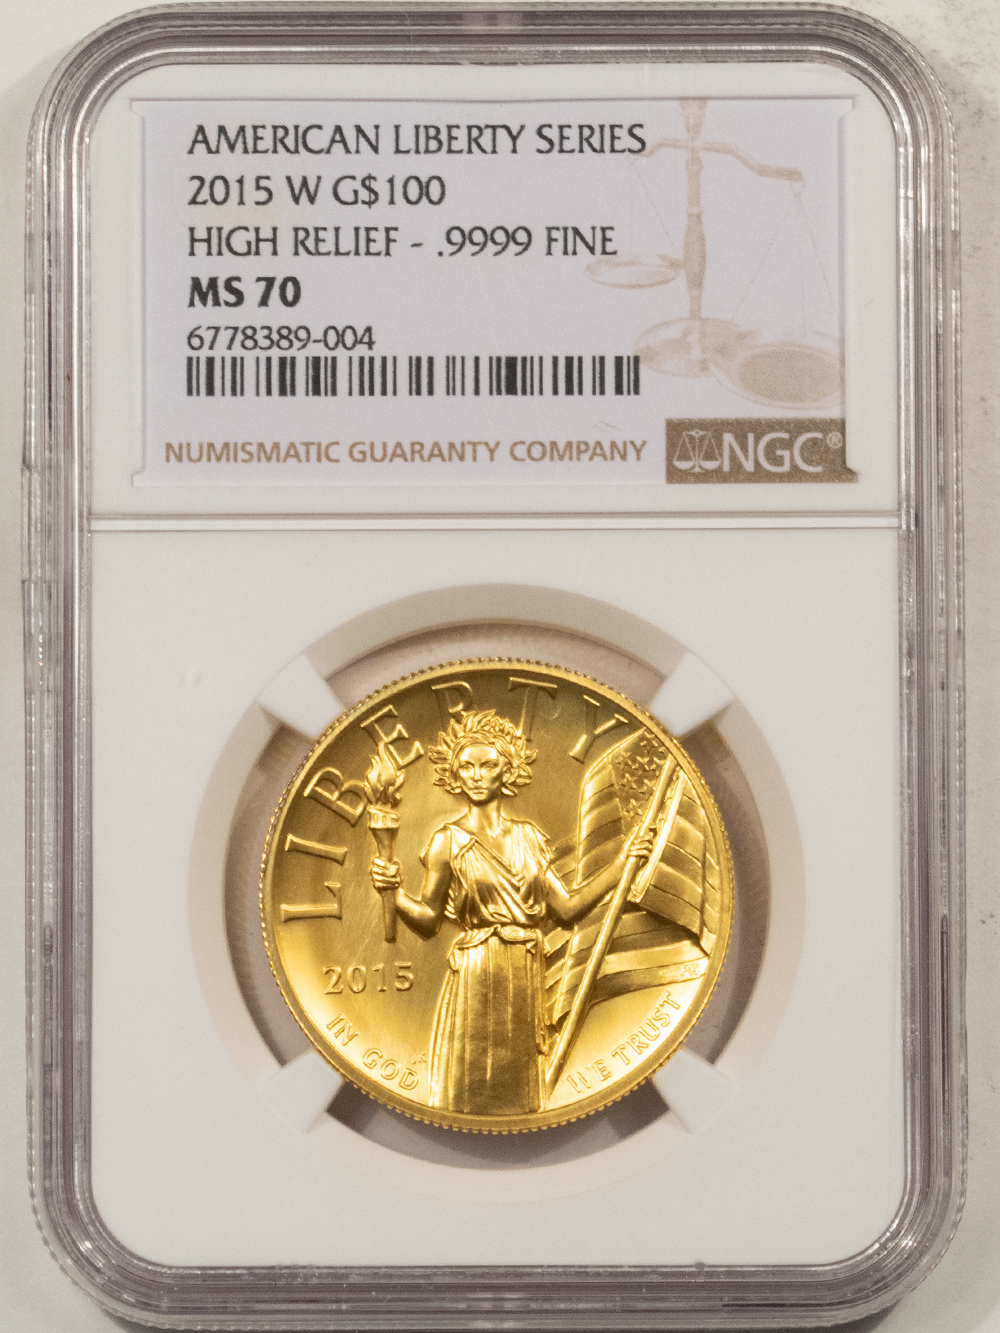 2015-W $100 GOLD AMERICAN LIBERTY SERIES, HIGH RELIEF .9999 - NGC